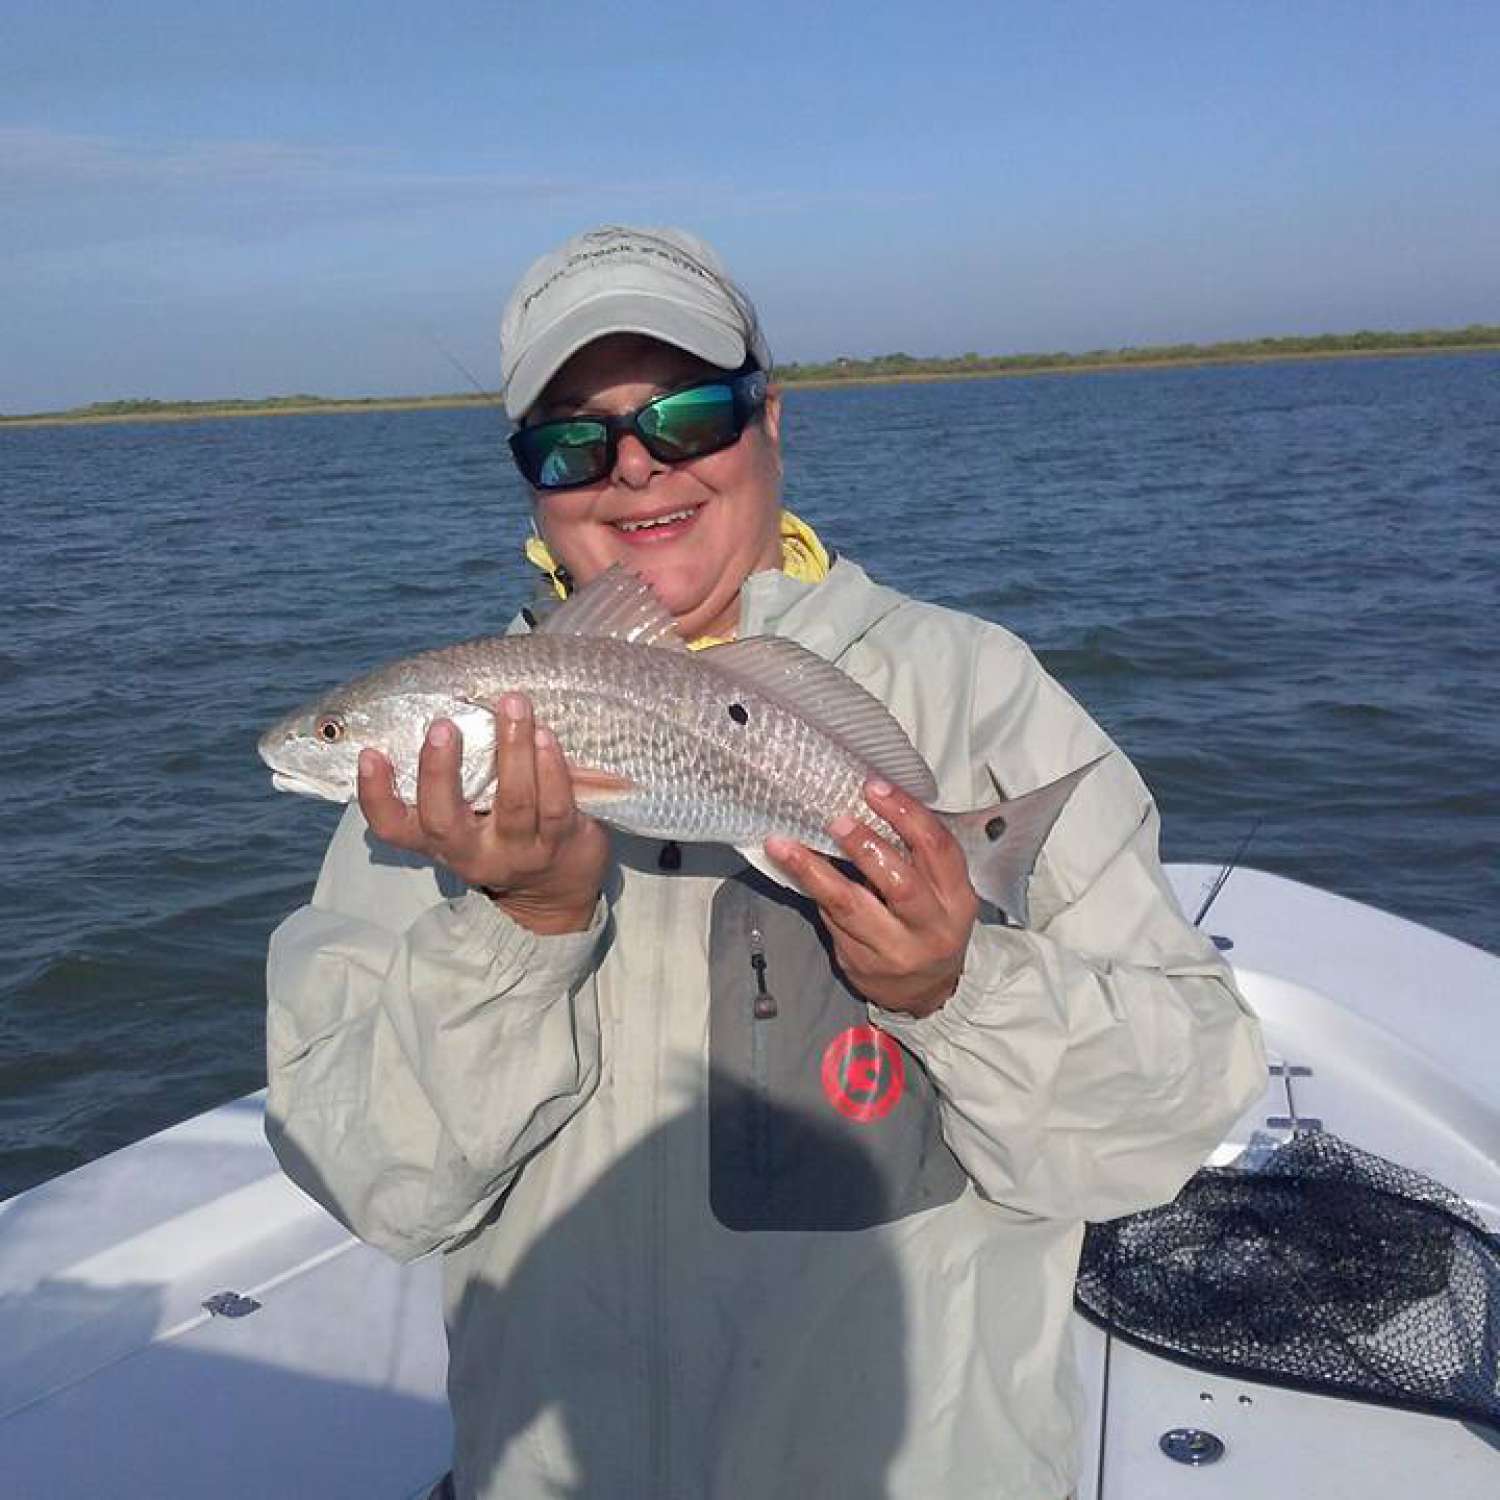 Tally with her first Redfish caught on a artificial lure.